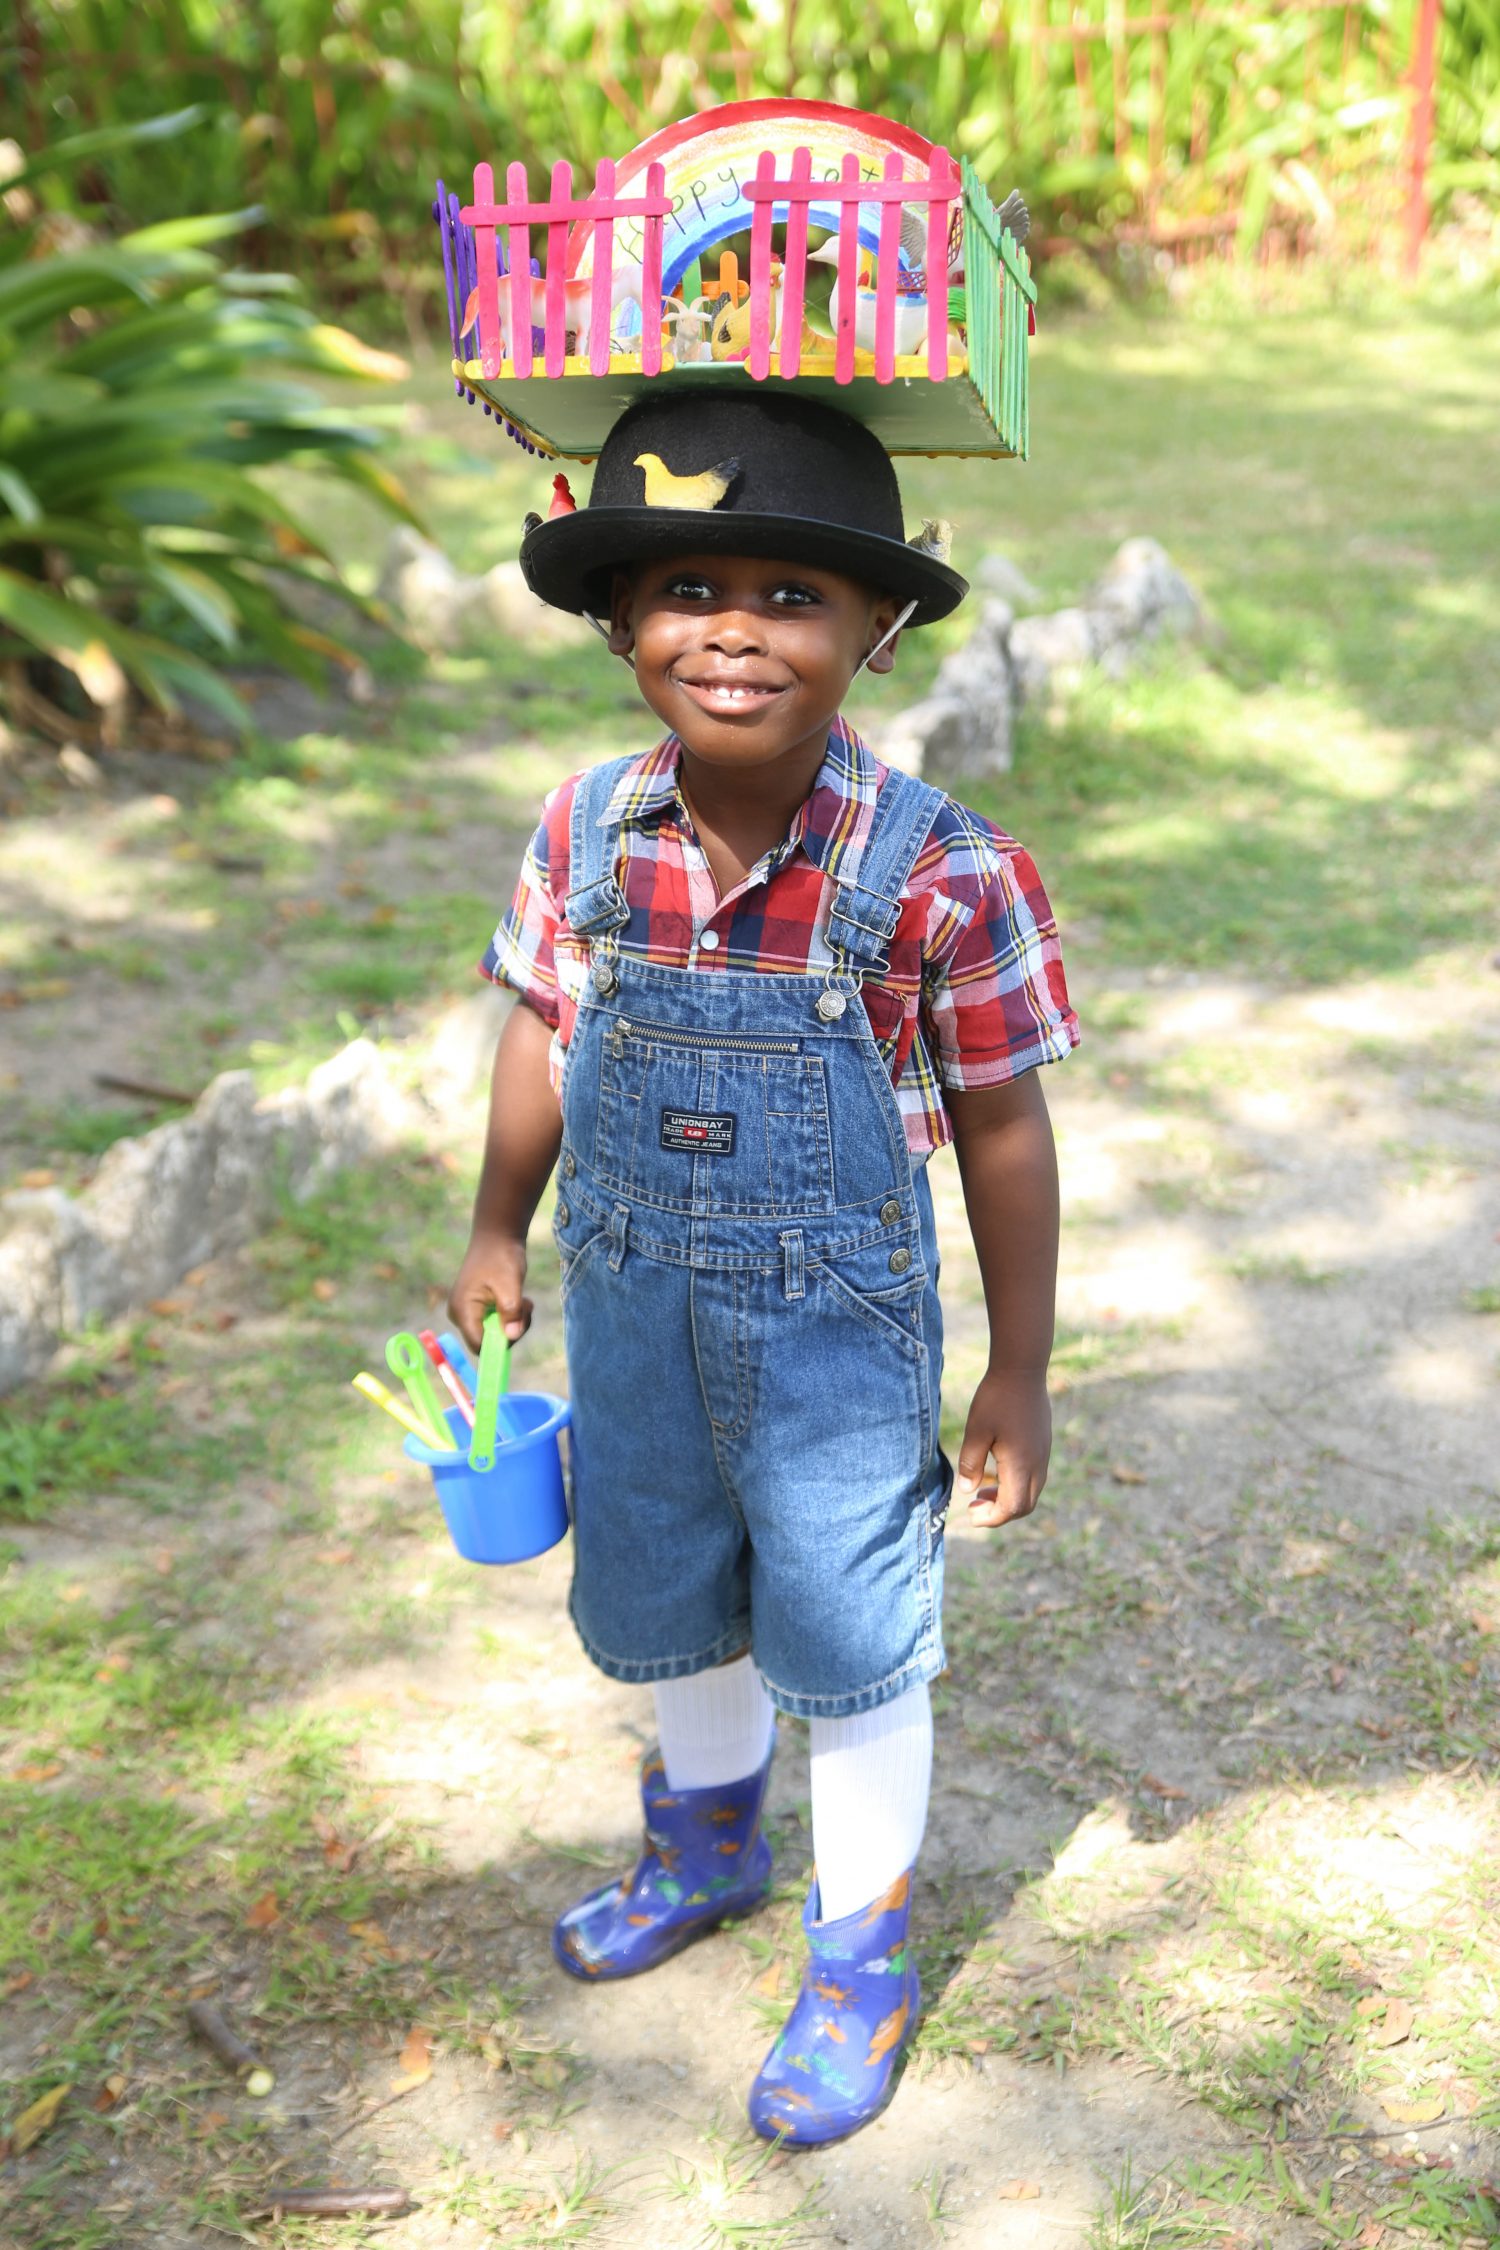 Farmer brown came to town and attended the hat show! 
This young boy wore his unique hat to the Starter’s Nursery Hat Show, which was held yesterday at the Promenade Gardens. (Photo by Keno George) 